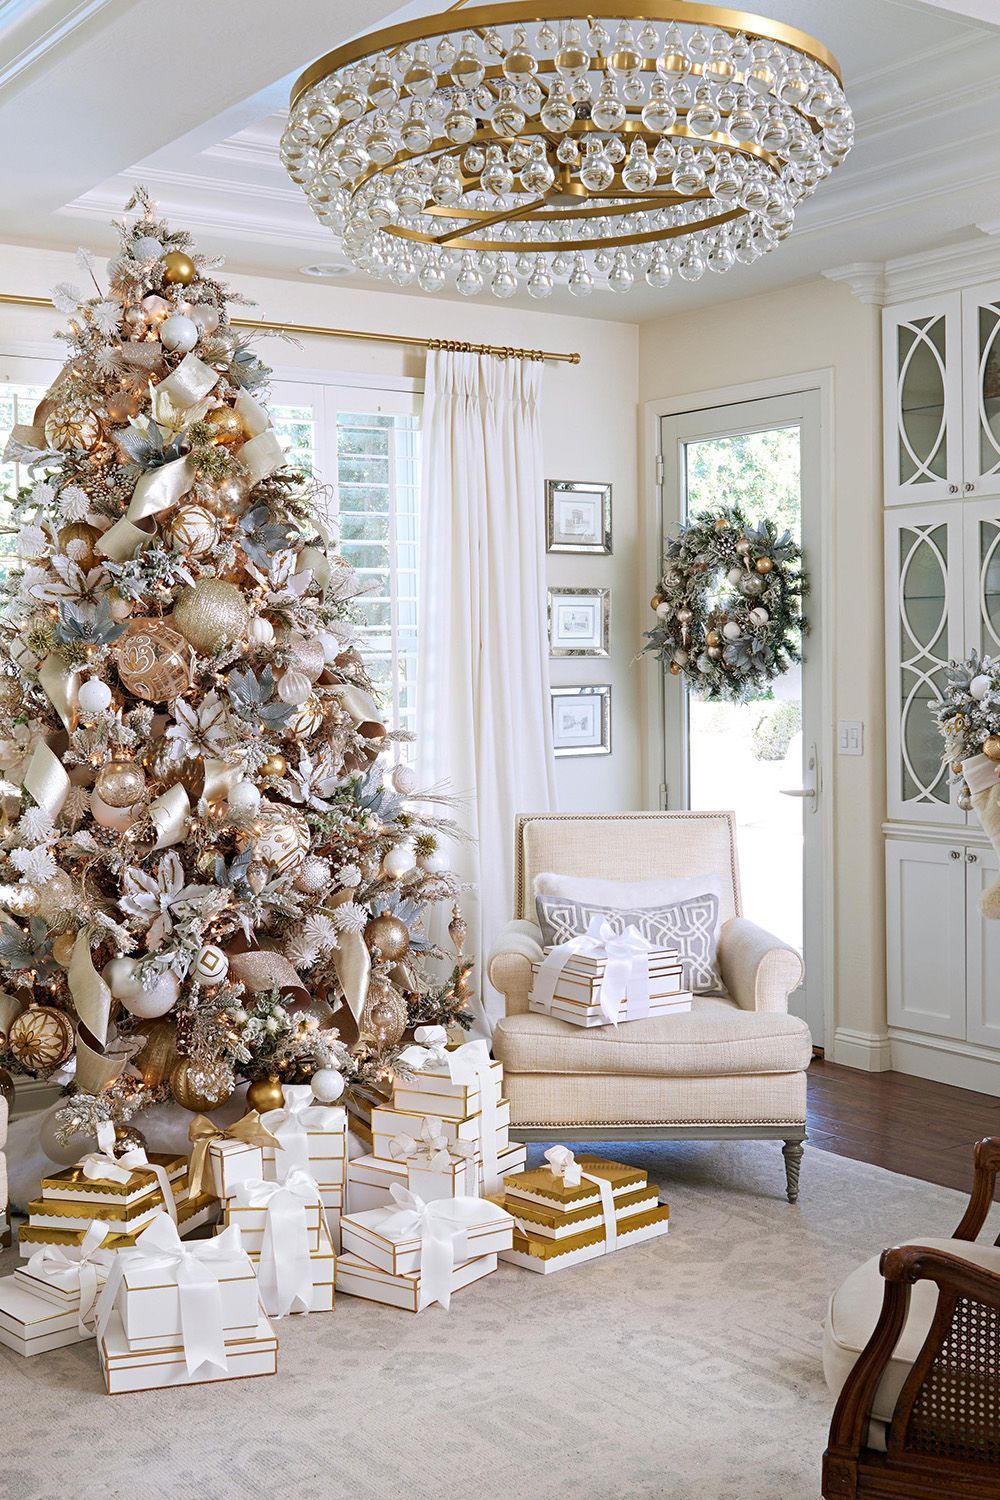 35 Pretty Christmas Living Room Ideas to Get You Ready for the Holidays -   19 christmas ideas